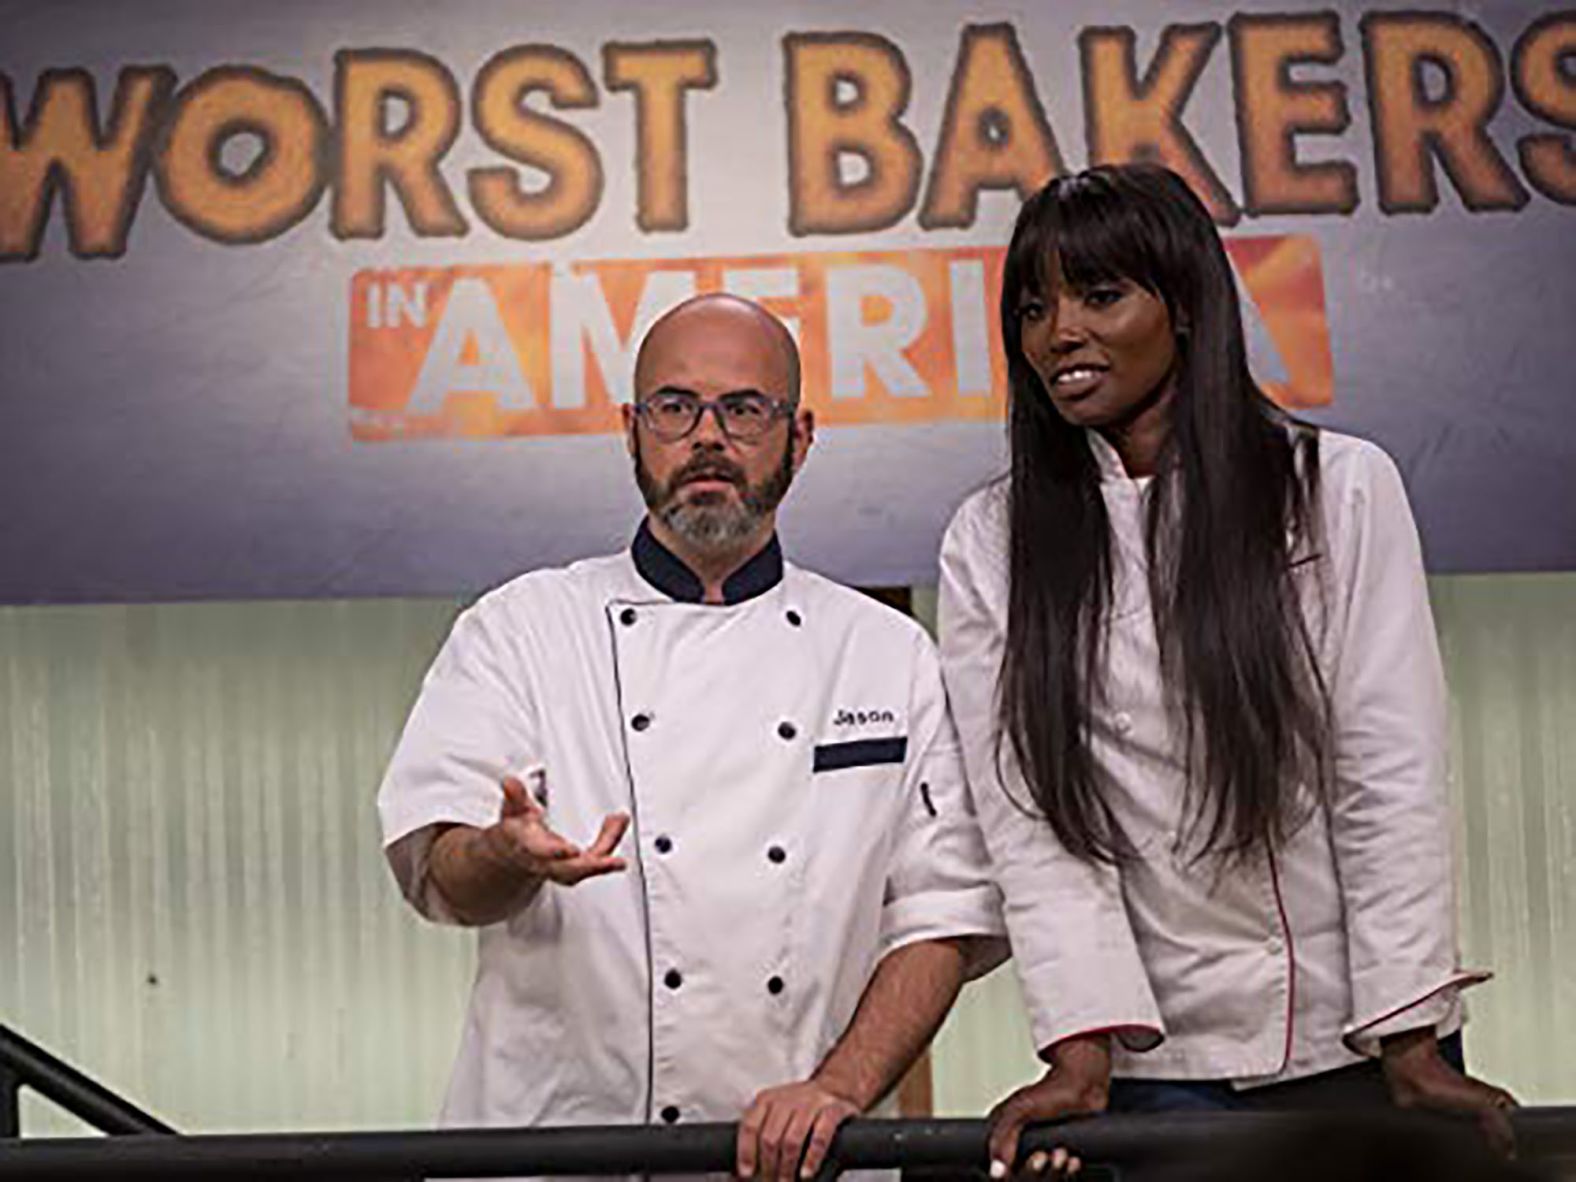 <strong>"Worst Bakers in America" Season 2</strong>: Some of the country's worst bakers are drafted into the most-intense baking Boot Camp imaginable. Under the watchful eyes of Chef Jason Smith and Chef Lorraine Pascale, these kitchen fakers have just five weeks to turn into expert bakers and win the grand prize. <strong>(Hulu) </strong>